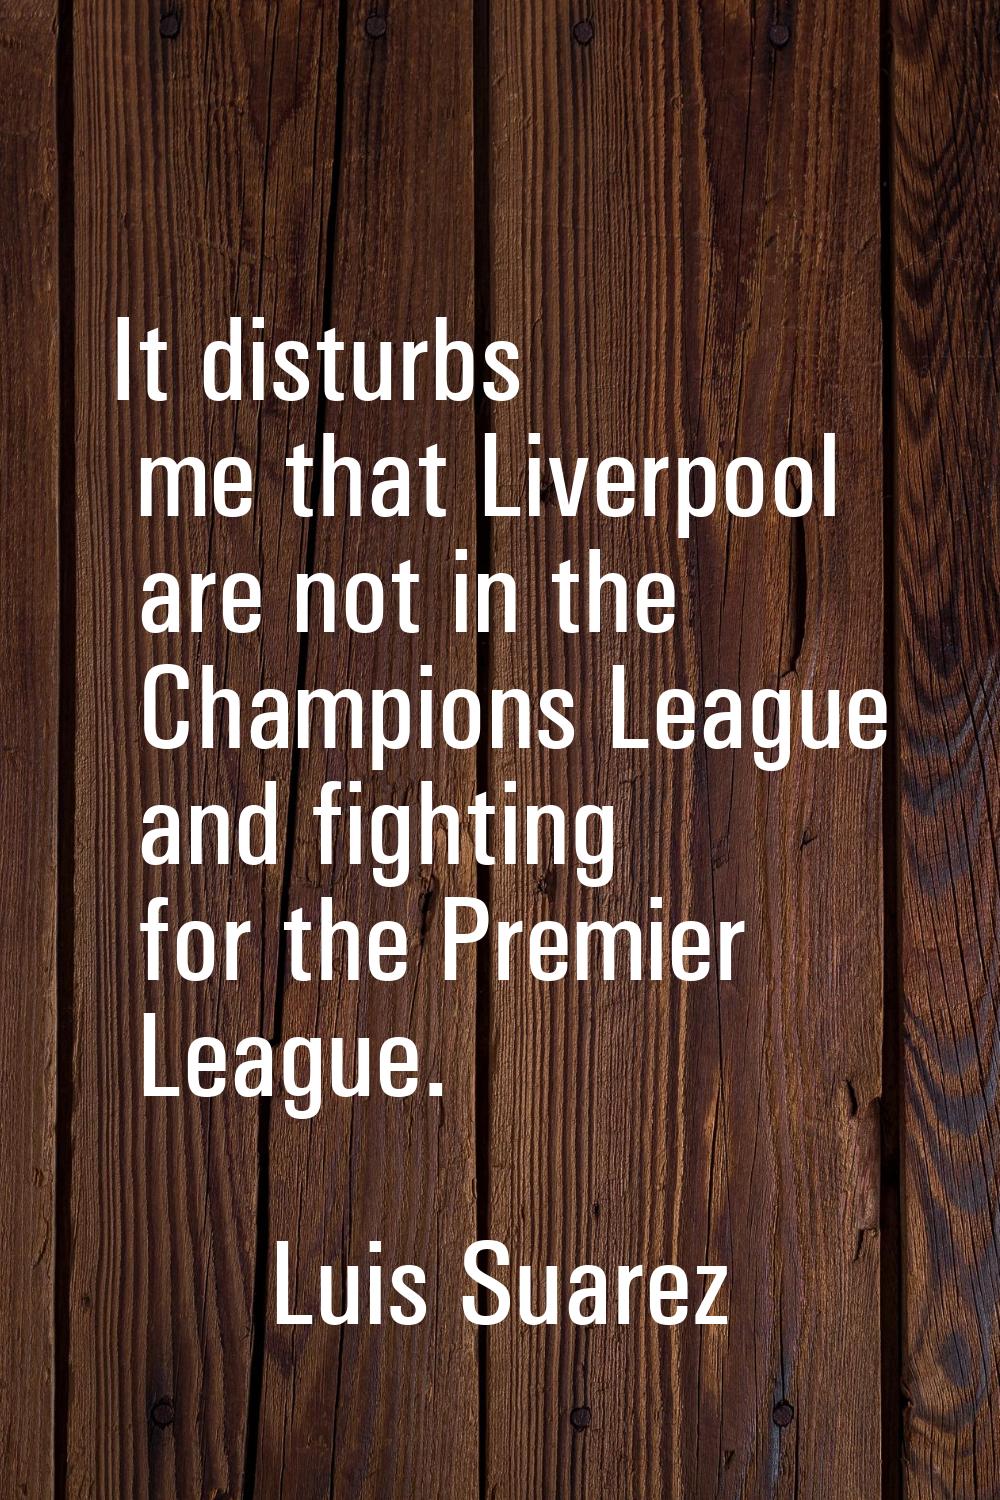 It disturbs me that Liverpool are not in the Champions League and fighting for the Premier League.